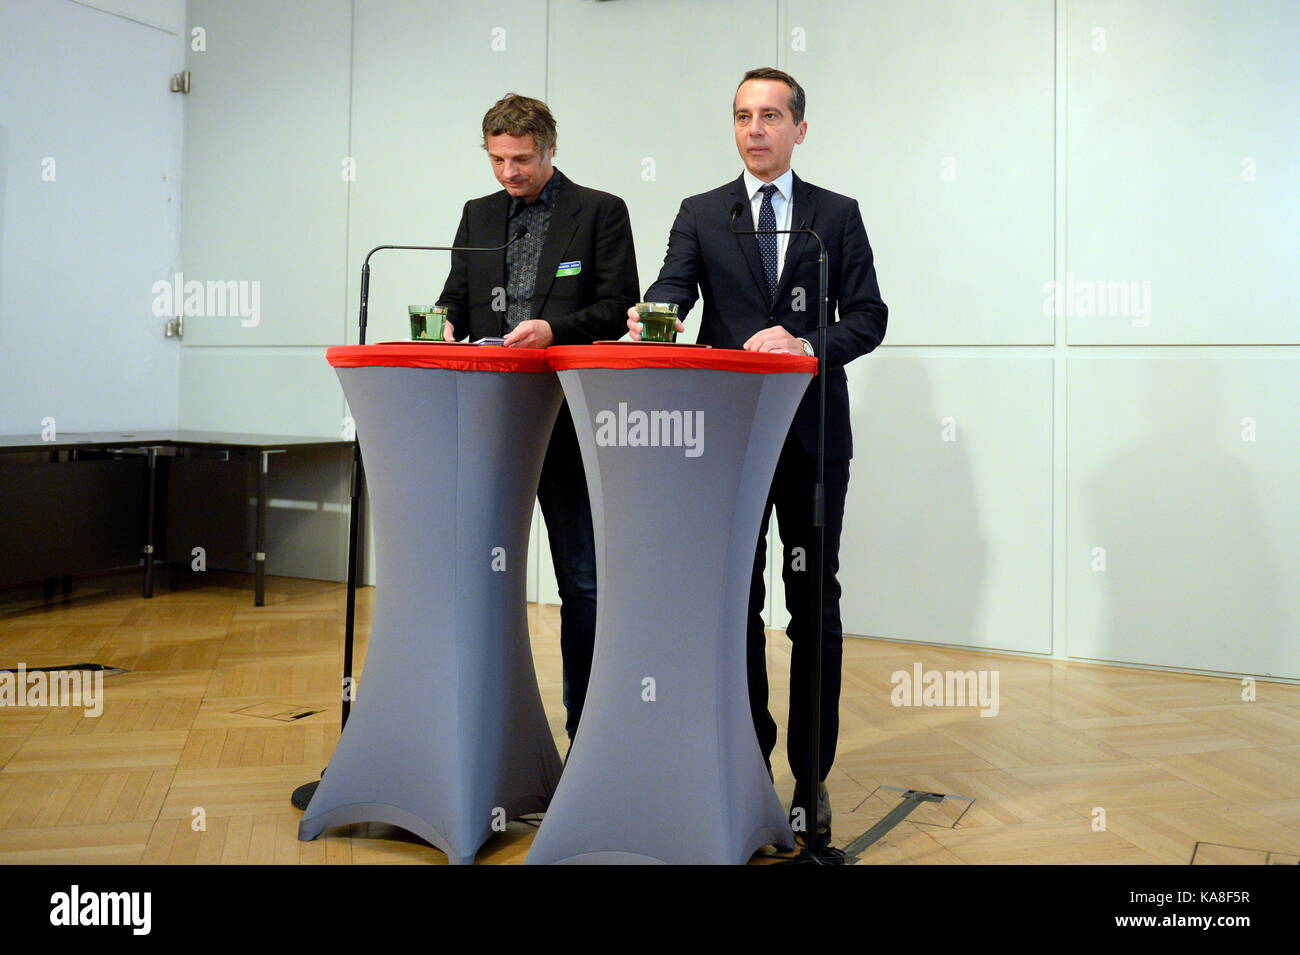 Vienna, Austria. 26th Sep, 2017. Press conference with Federal Chancellor Christian Kern and environmental chemist Helmut Burtscher from Global 2000 on current environmental policy issues. Image shows environmental chemist Helmut Burtscher-Schaden (L) and Federal Chancellor Christian Kern (R). Credit: Franz Perc/Alamy Live News Stock Photo